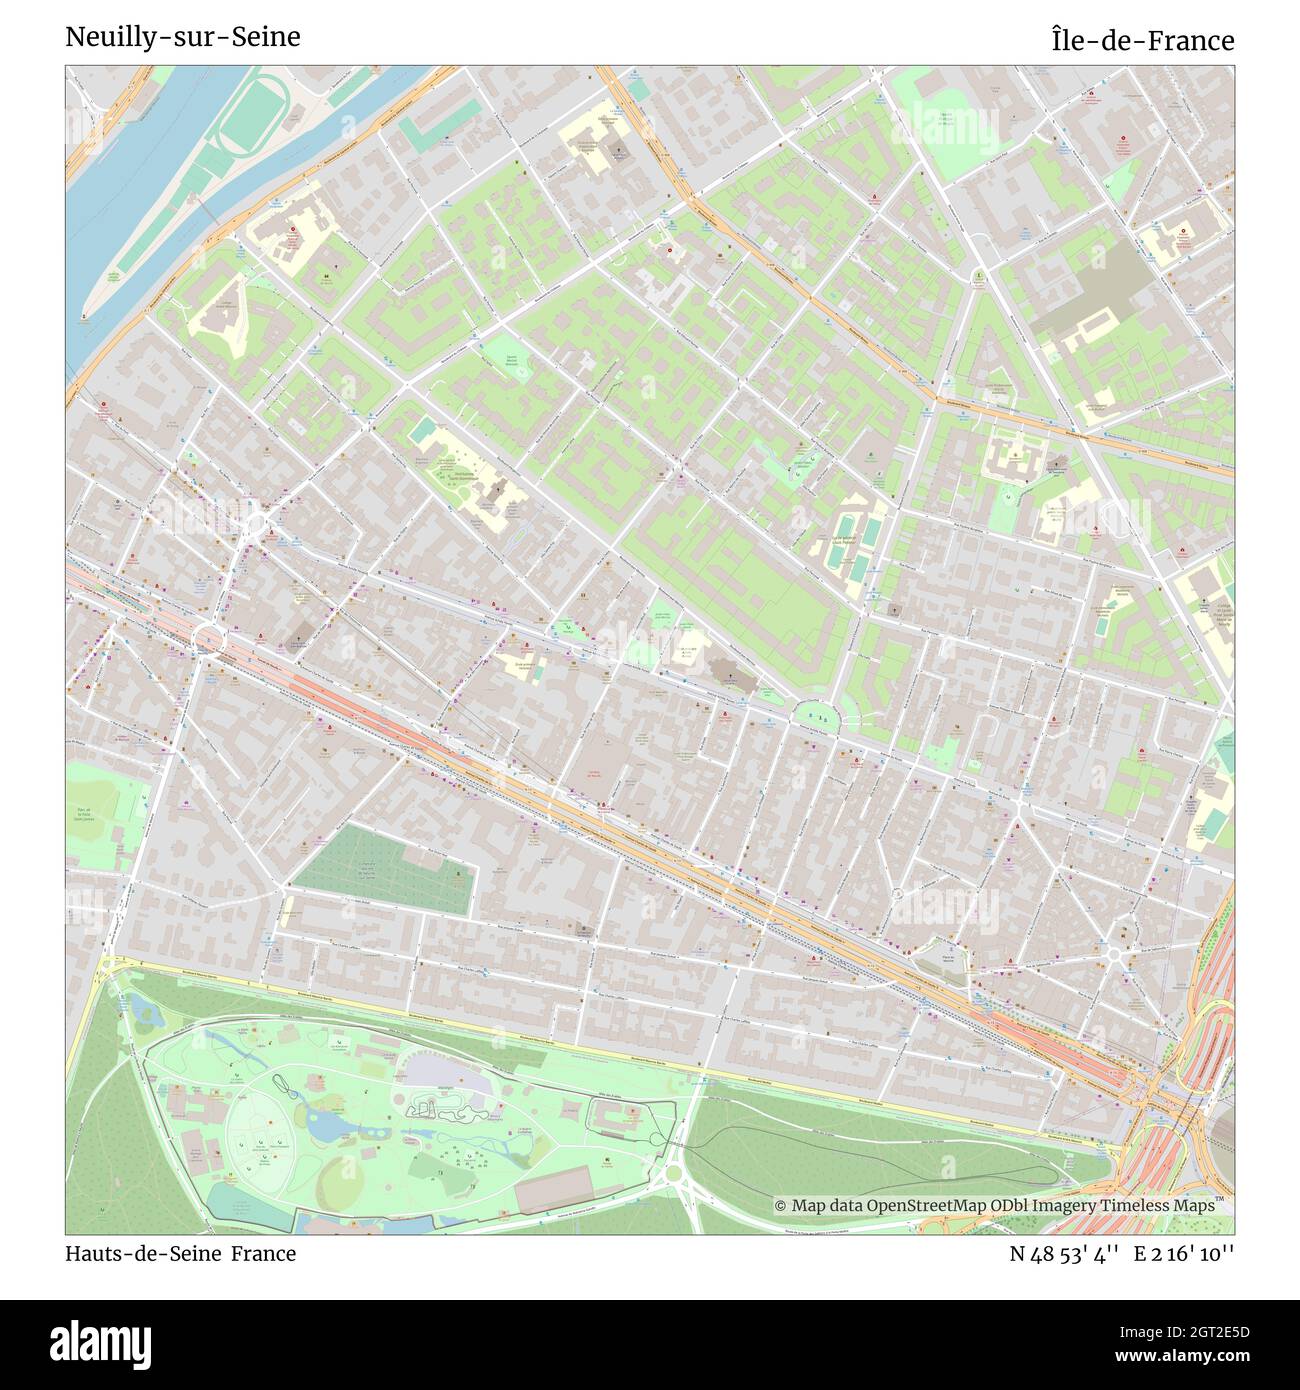 Neuilly-sur-Seine, Hauts-de-Seine, France, Île-de-France, N 48 53' 4'', E 2 16' 10'', map, Timeless Map published in 2021. Travelers, explorers and adventurers like Florence Nightingale, David Livingstone, Ernest Shackleton, Lewis and Clark and Sherlock Holmes relied on maps to plan travels to the world's most remote corners, Timeless Maps is mapping most locations on the globe, showing the achievement of great dreams Stock Photo